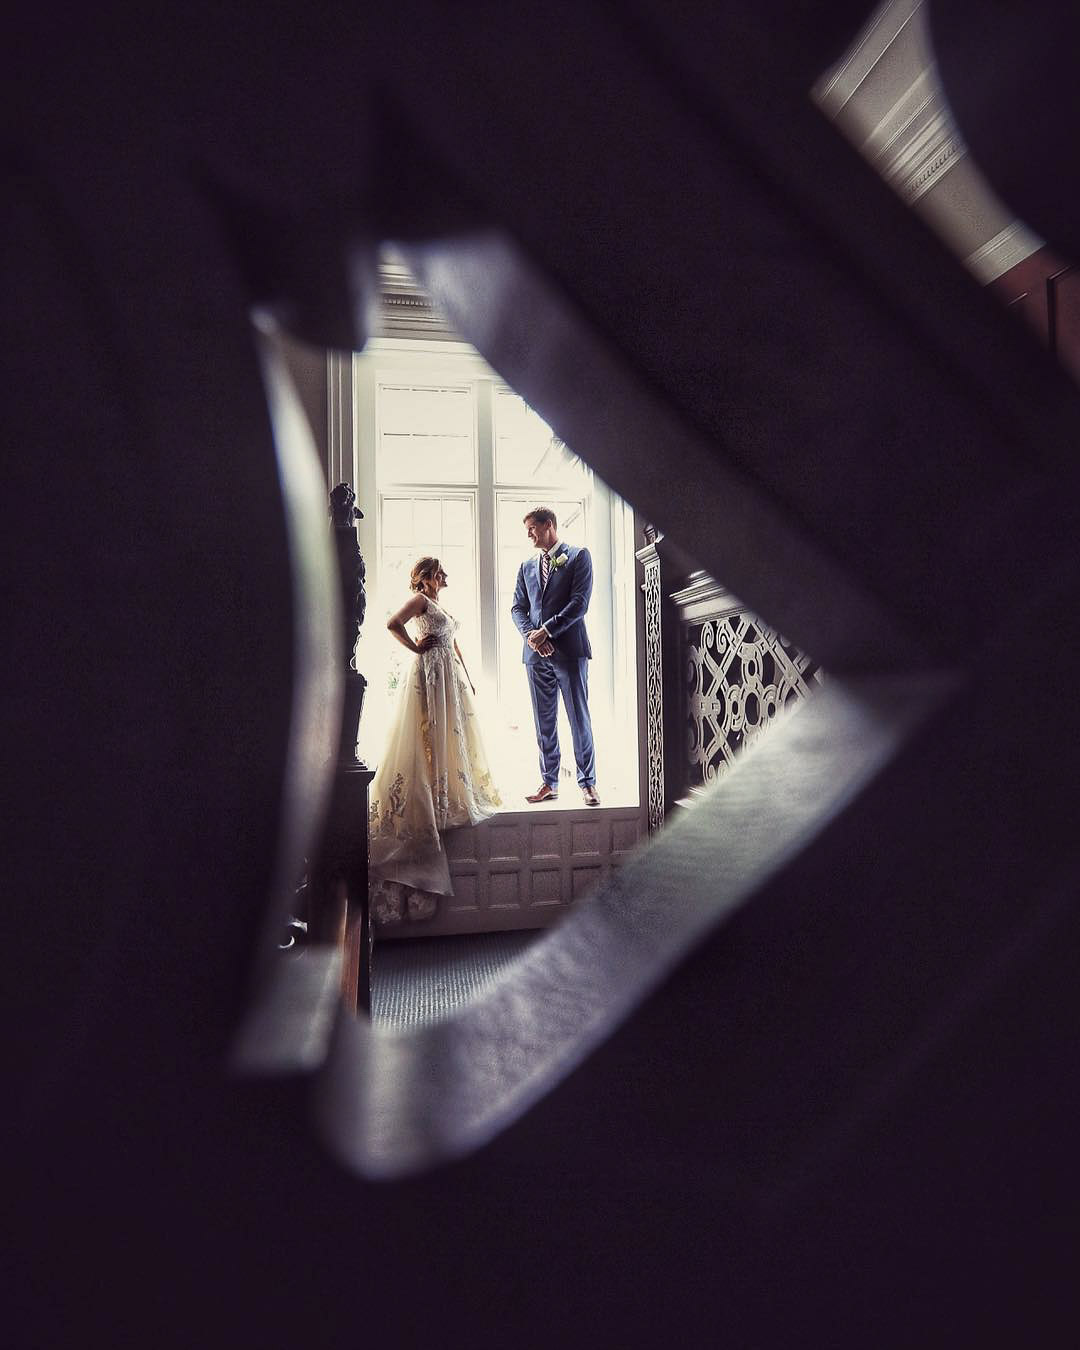 a wedding couple standing in front of a window seen through an creative opening in the wall